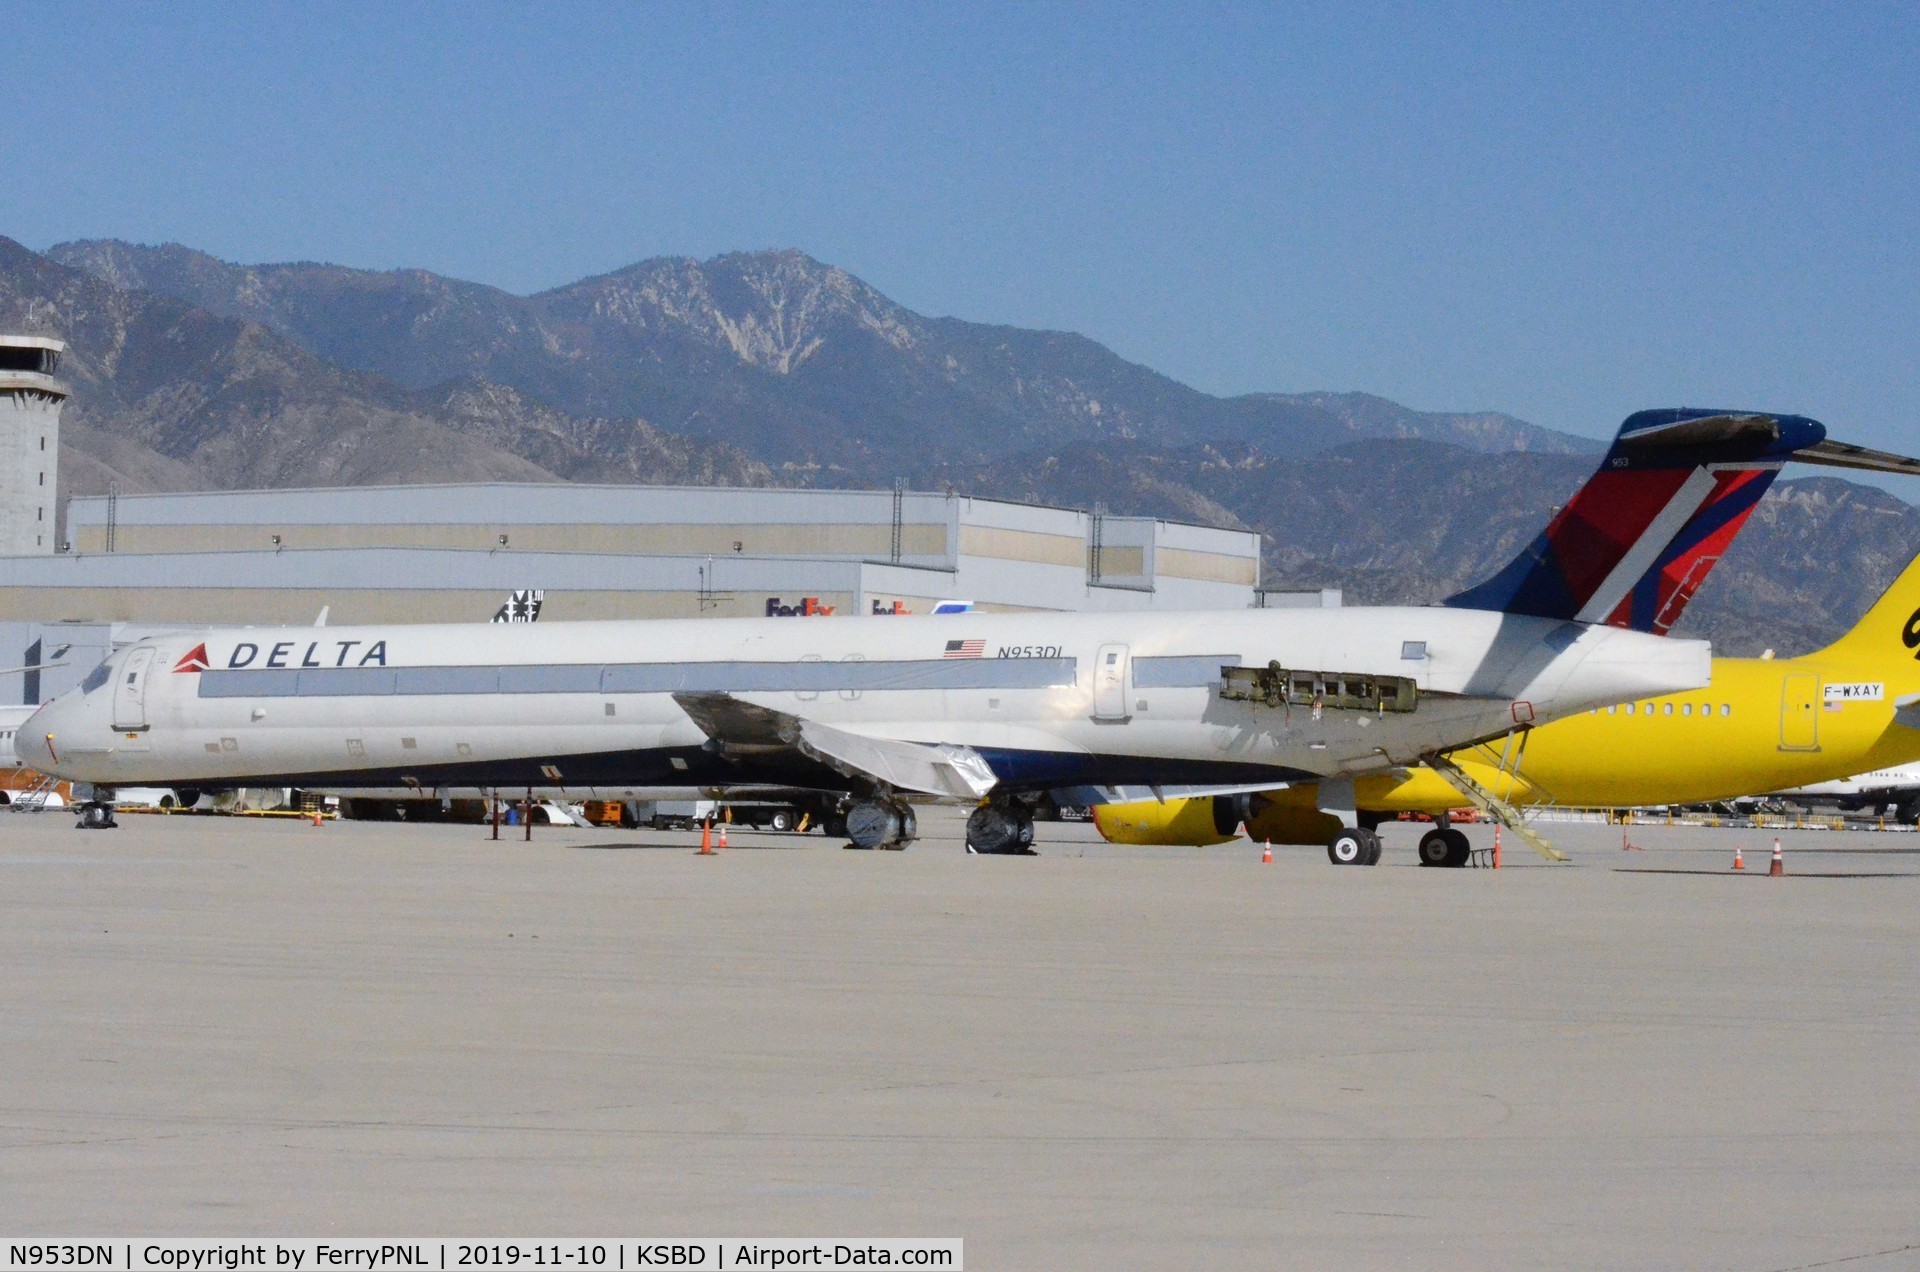 N953DN, 1996 McDonnell Douglas MD-90-30 C/N 53523, Delta MD90 at its (last) restingplace in SBD